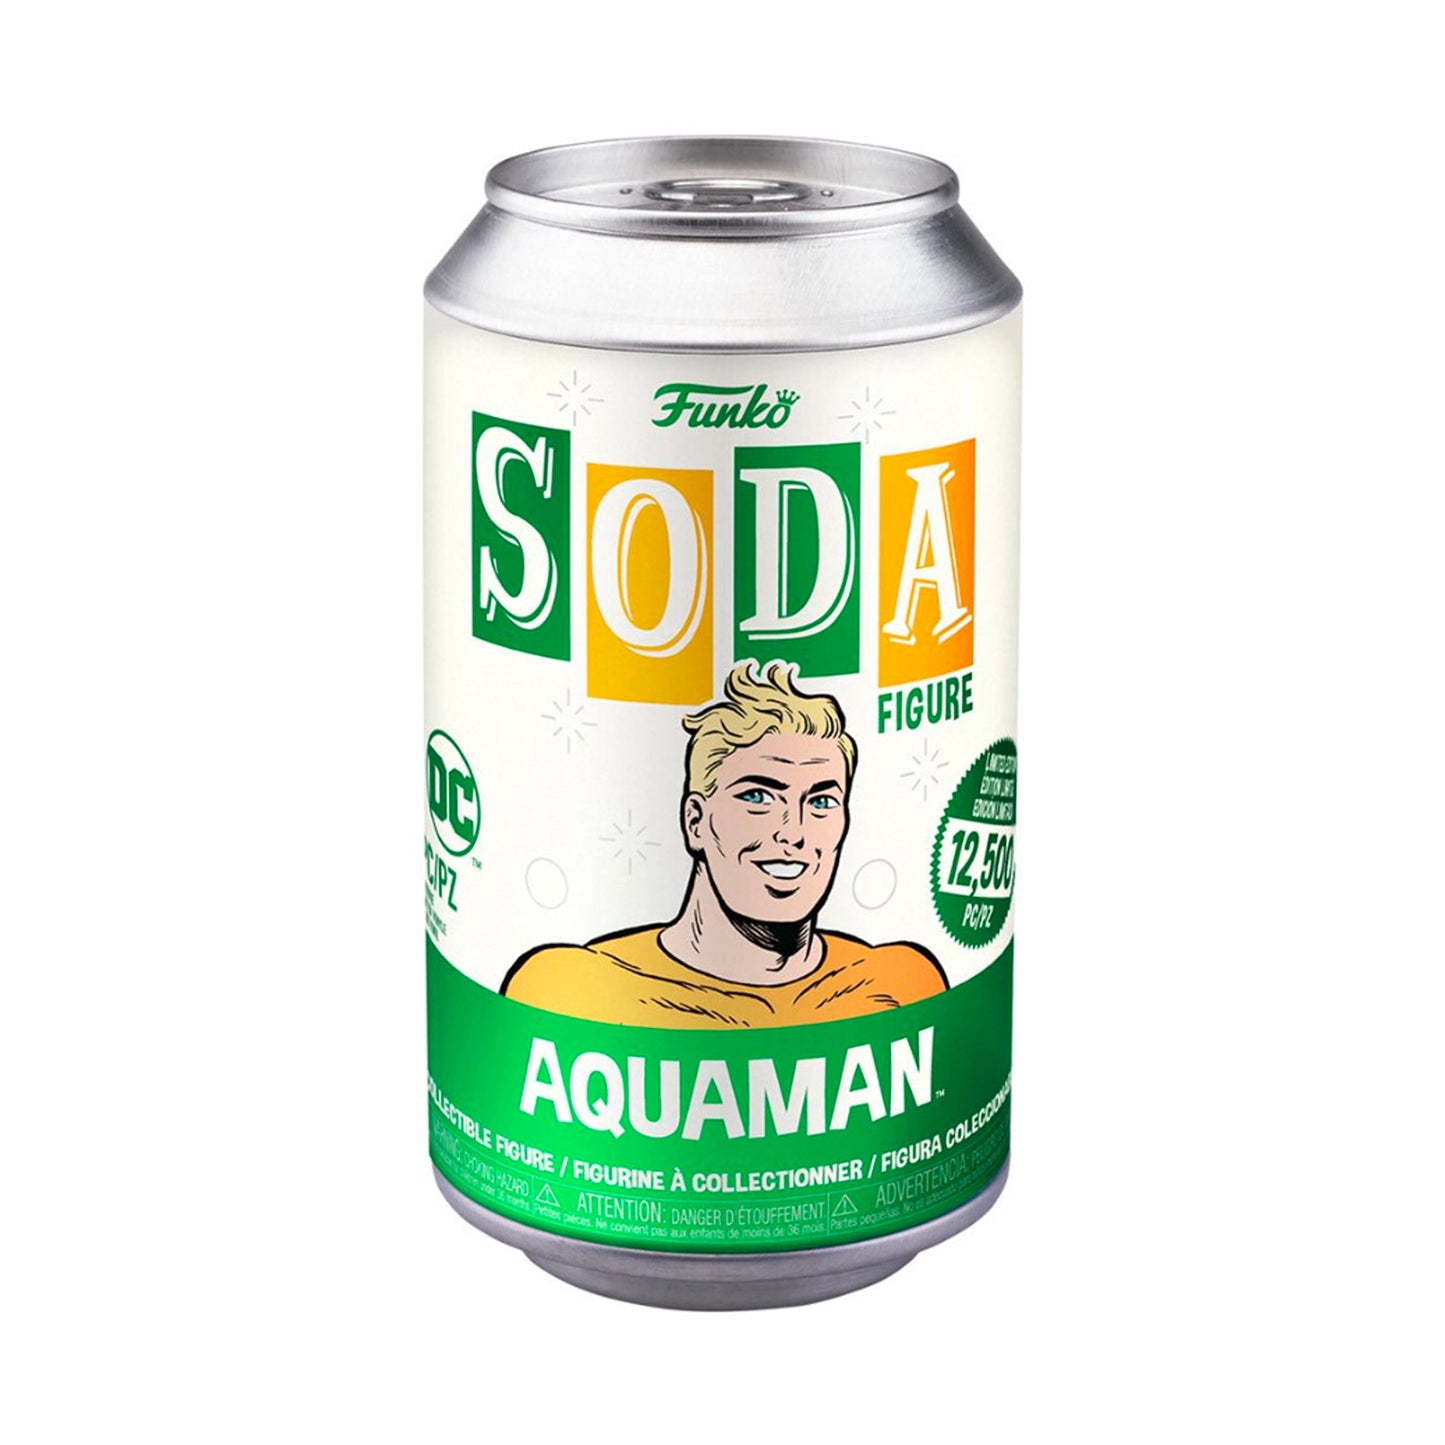 Funko Vinyl SODA: Aquaman 12,500 Limited Edition (1 in 6 Chance at Chase)